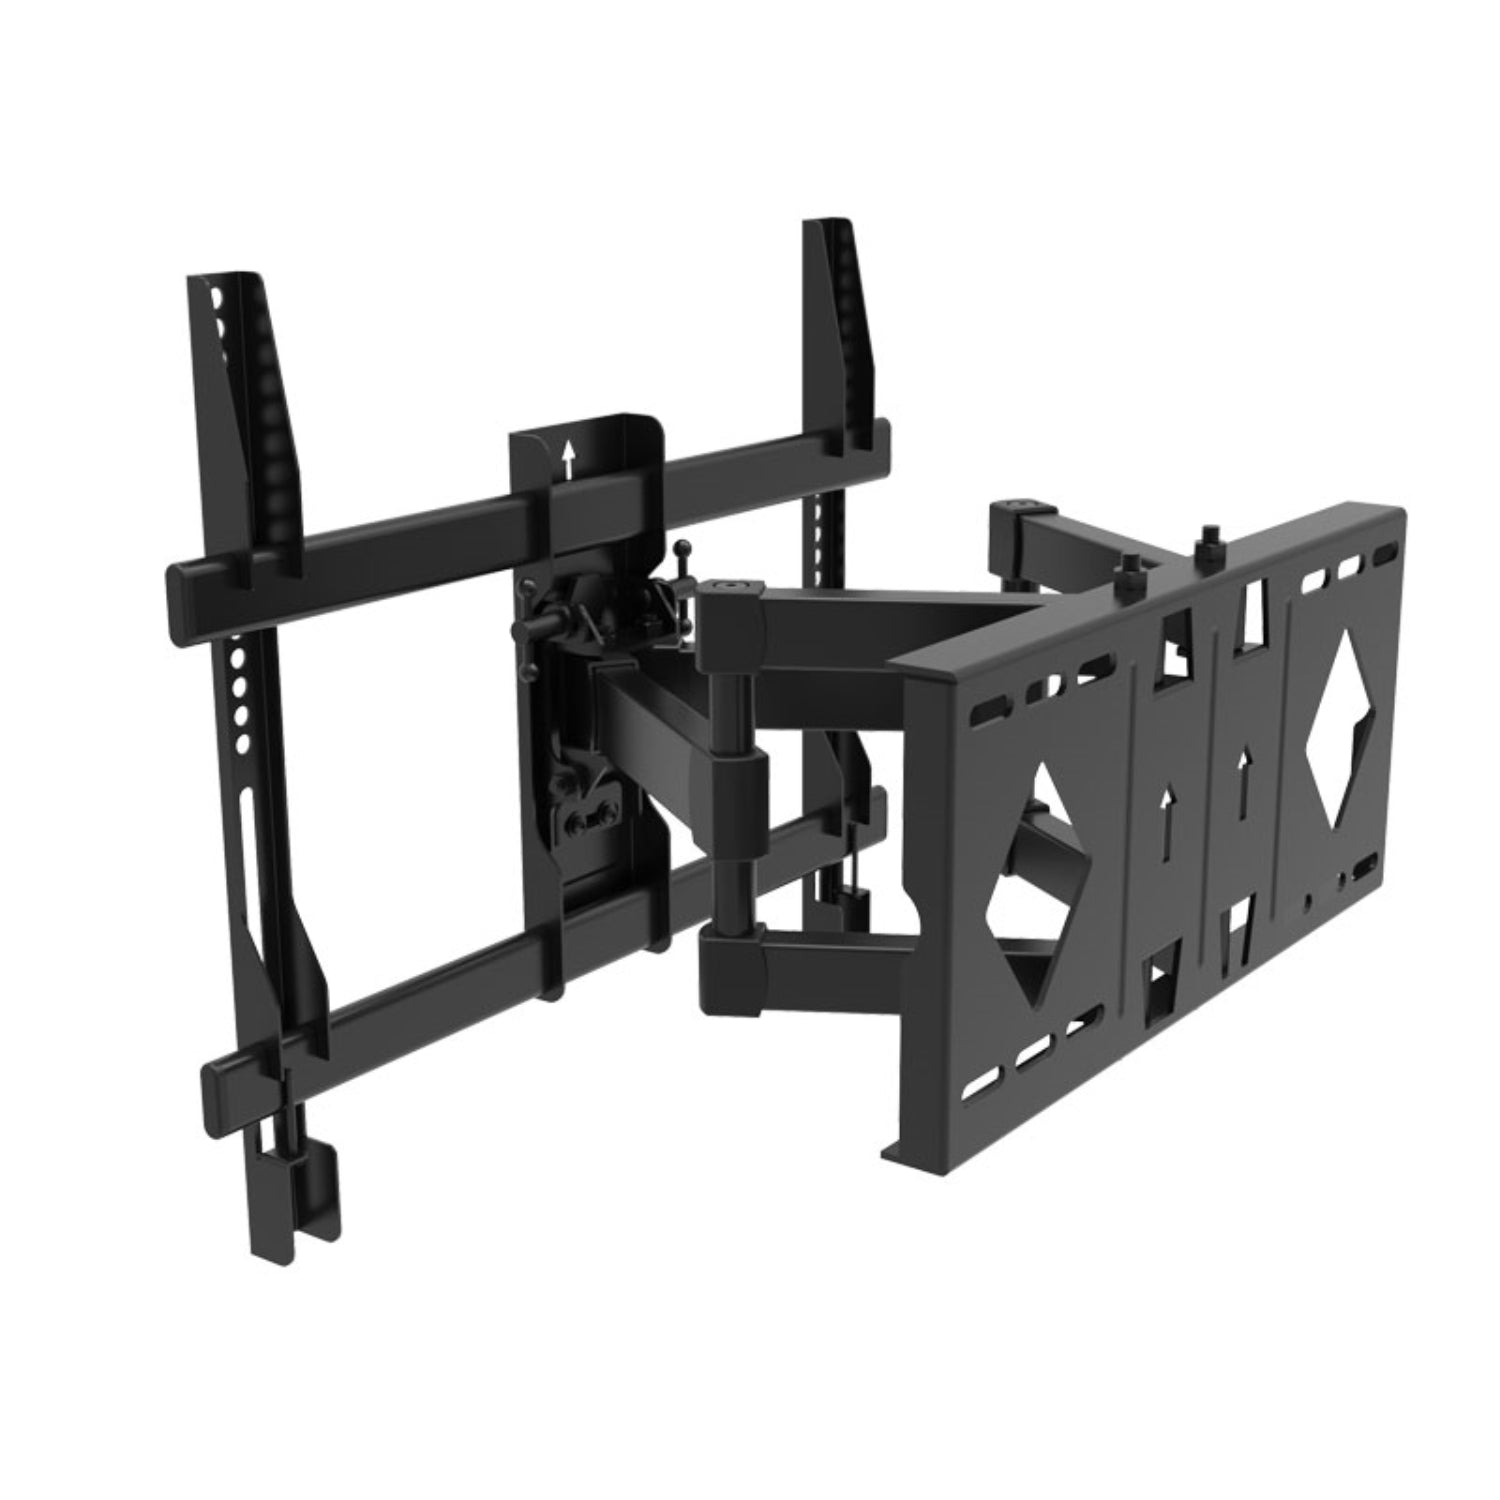 ViscoLogic Clench Adjustable Articulating TV Wall Mount Suitable for 32" - 65" TV's, VESA 100 x 100, 150 x 150, 200 x 100, 200 x 200, 400 x 200, 400x400, 600 x 400